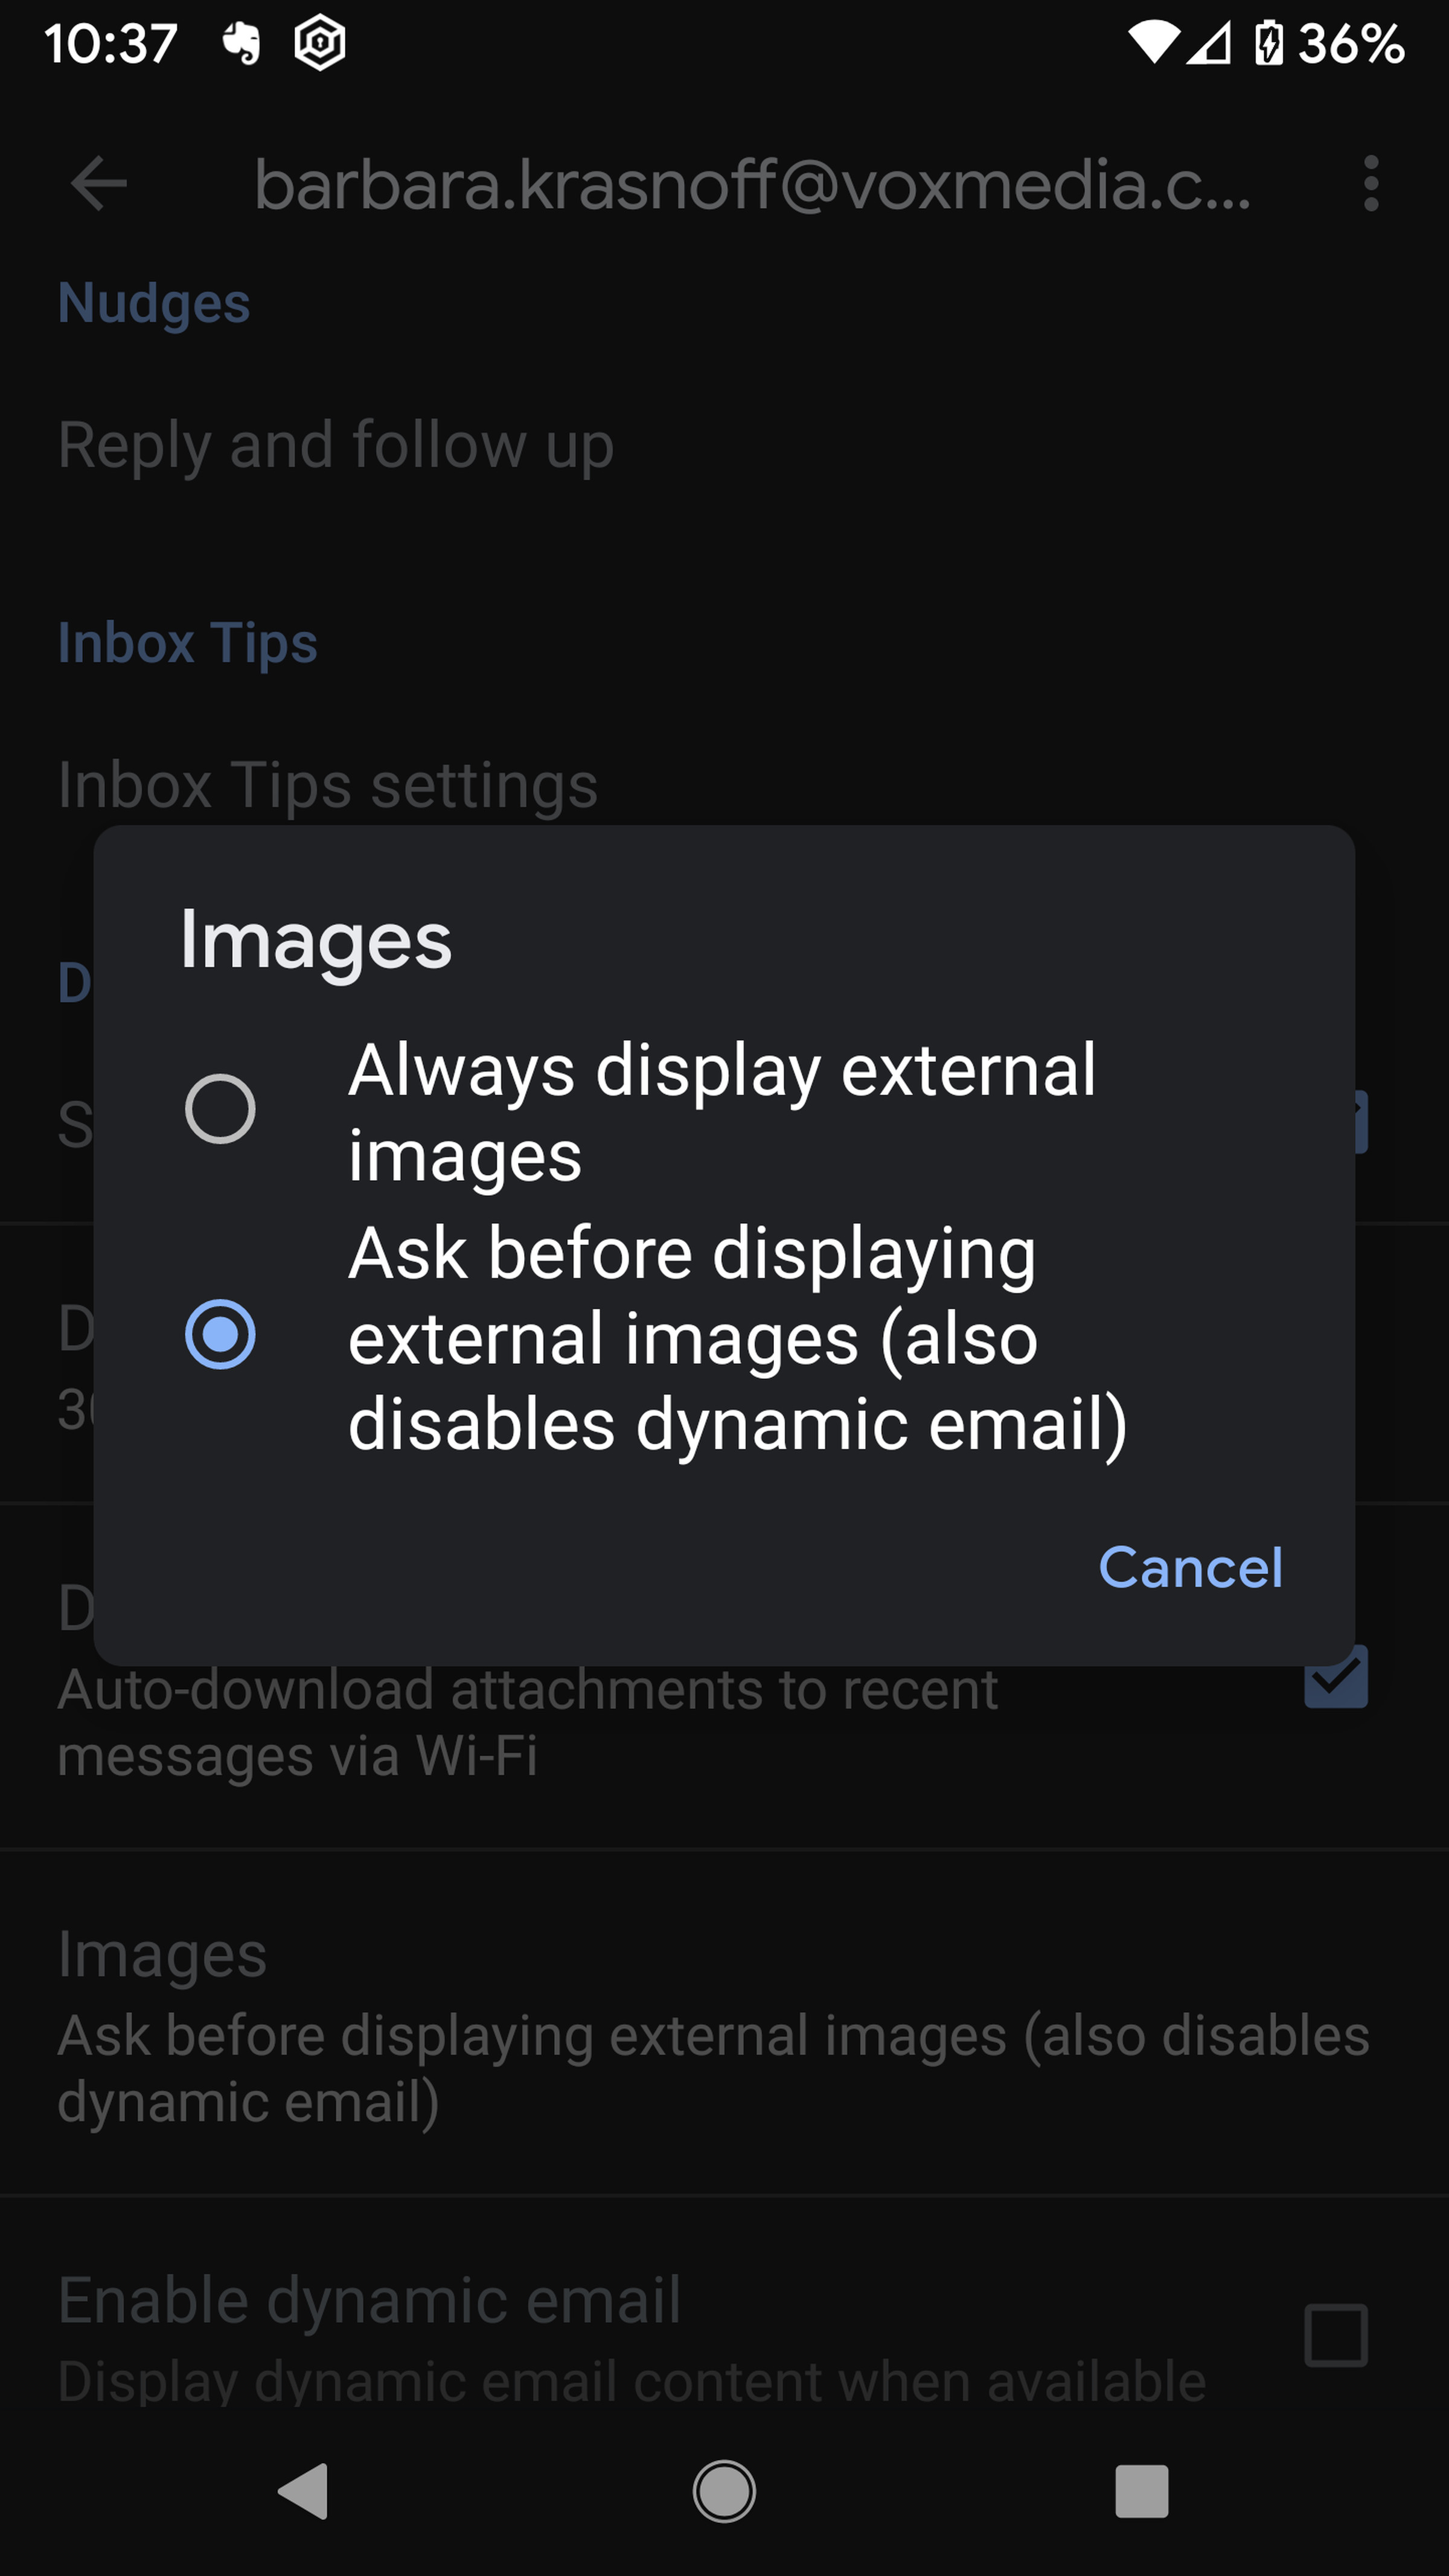 You can now disable the autoloading of images.